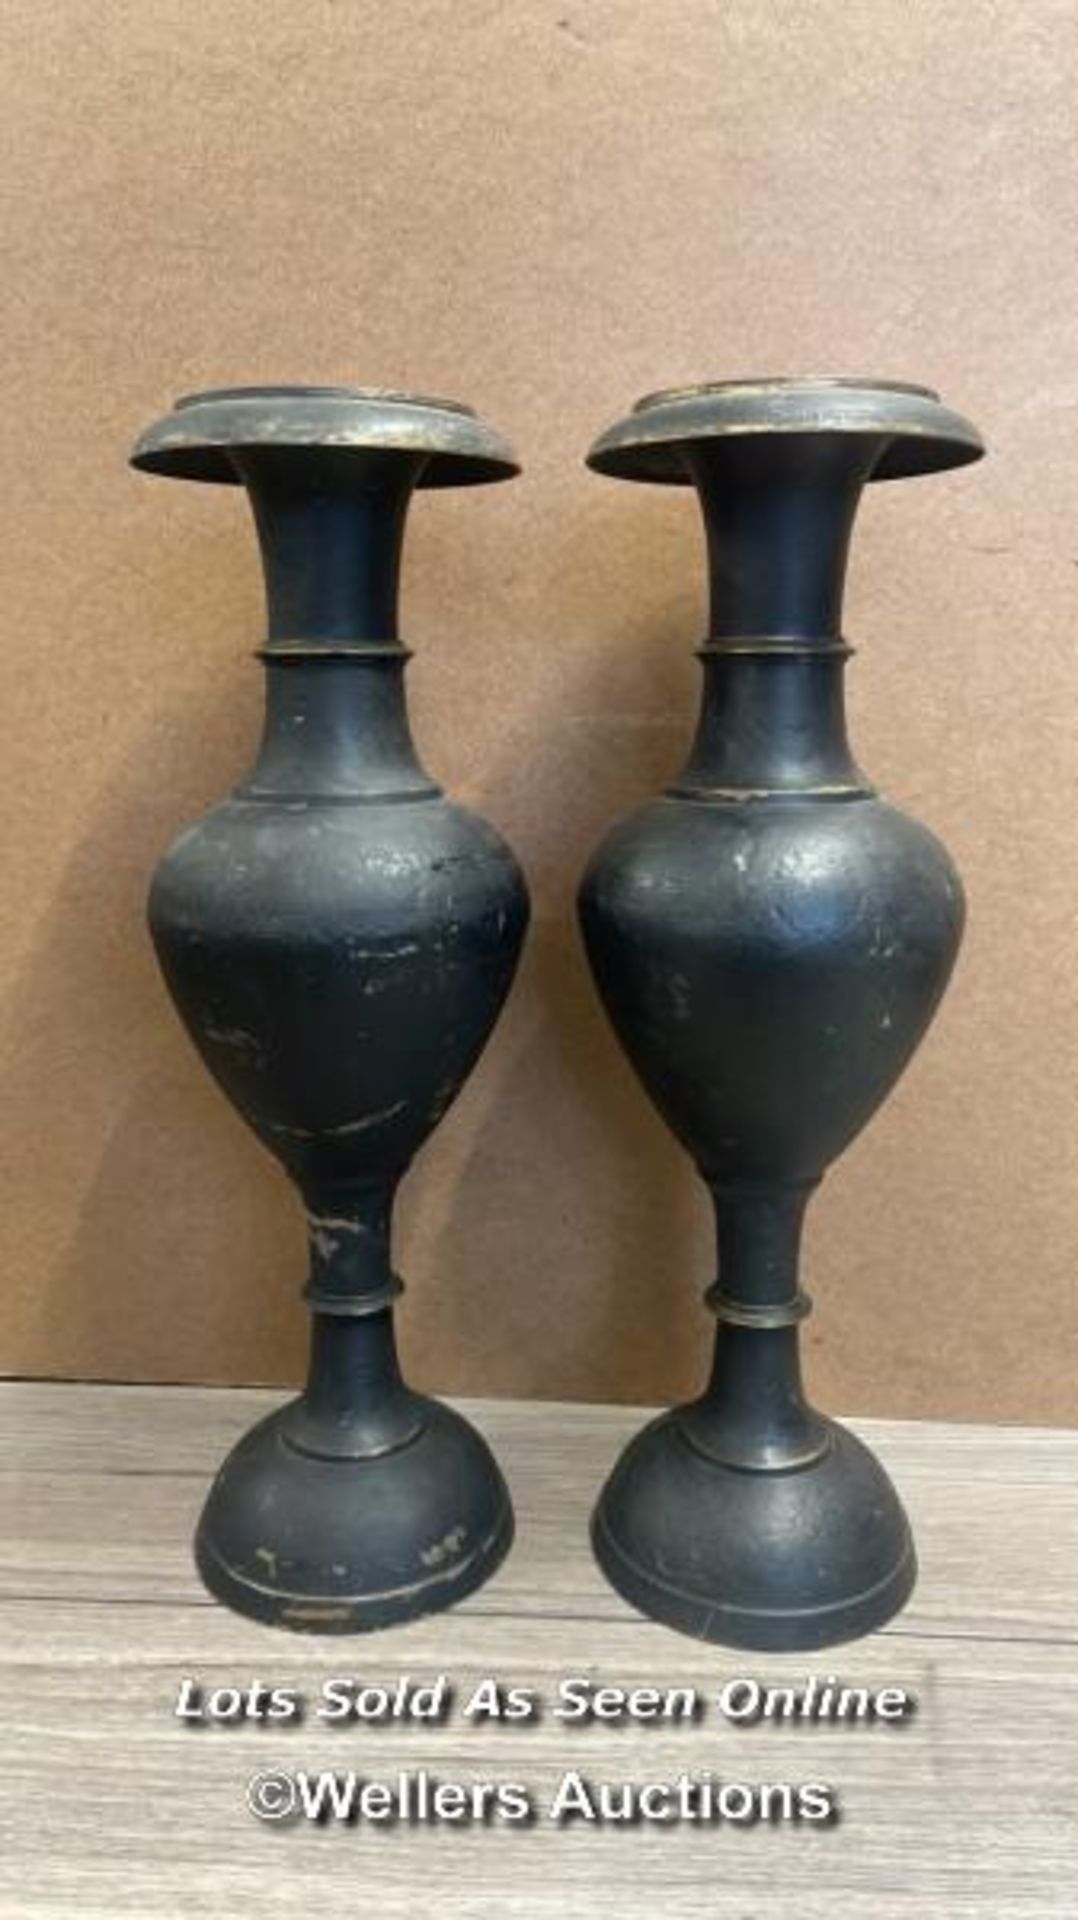 PAIR OF LARGE BRASS CANDLE HOLDERS PAINTED BLACK (PAINT NEEDS TO BE REMOVED), 50CM HIGH